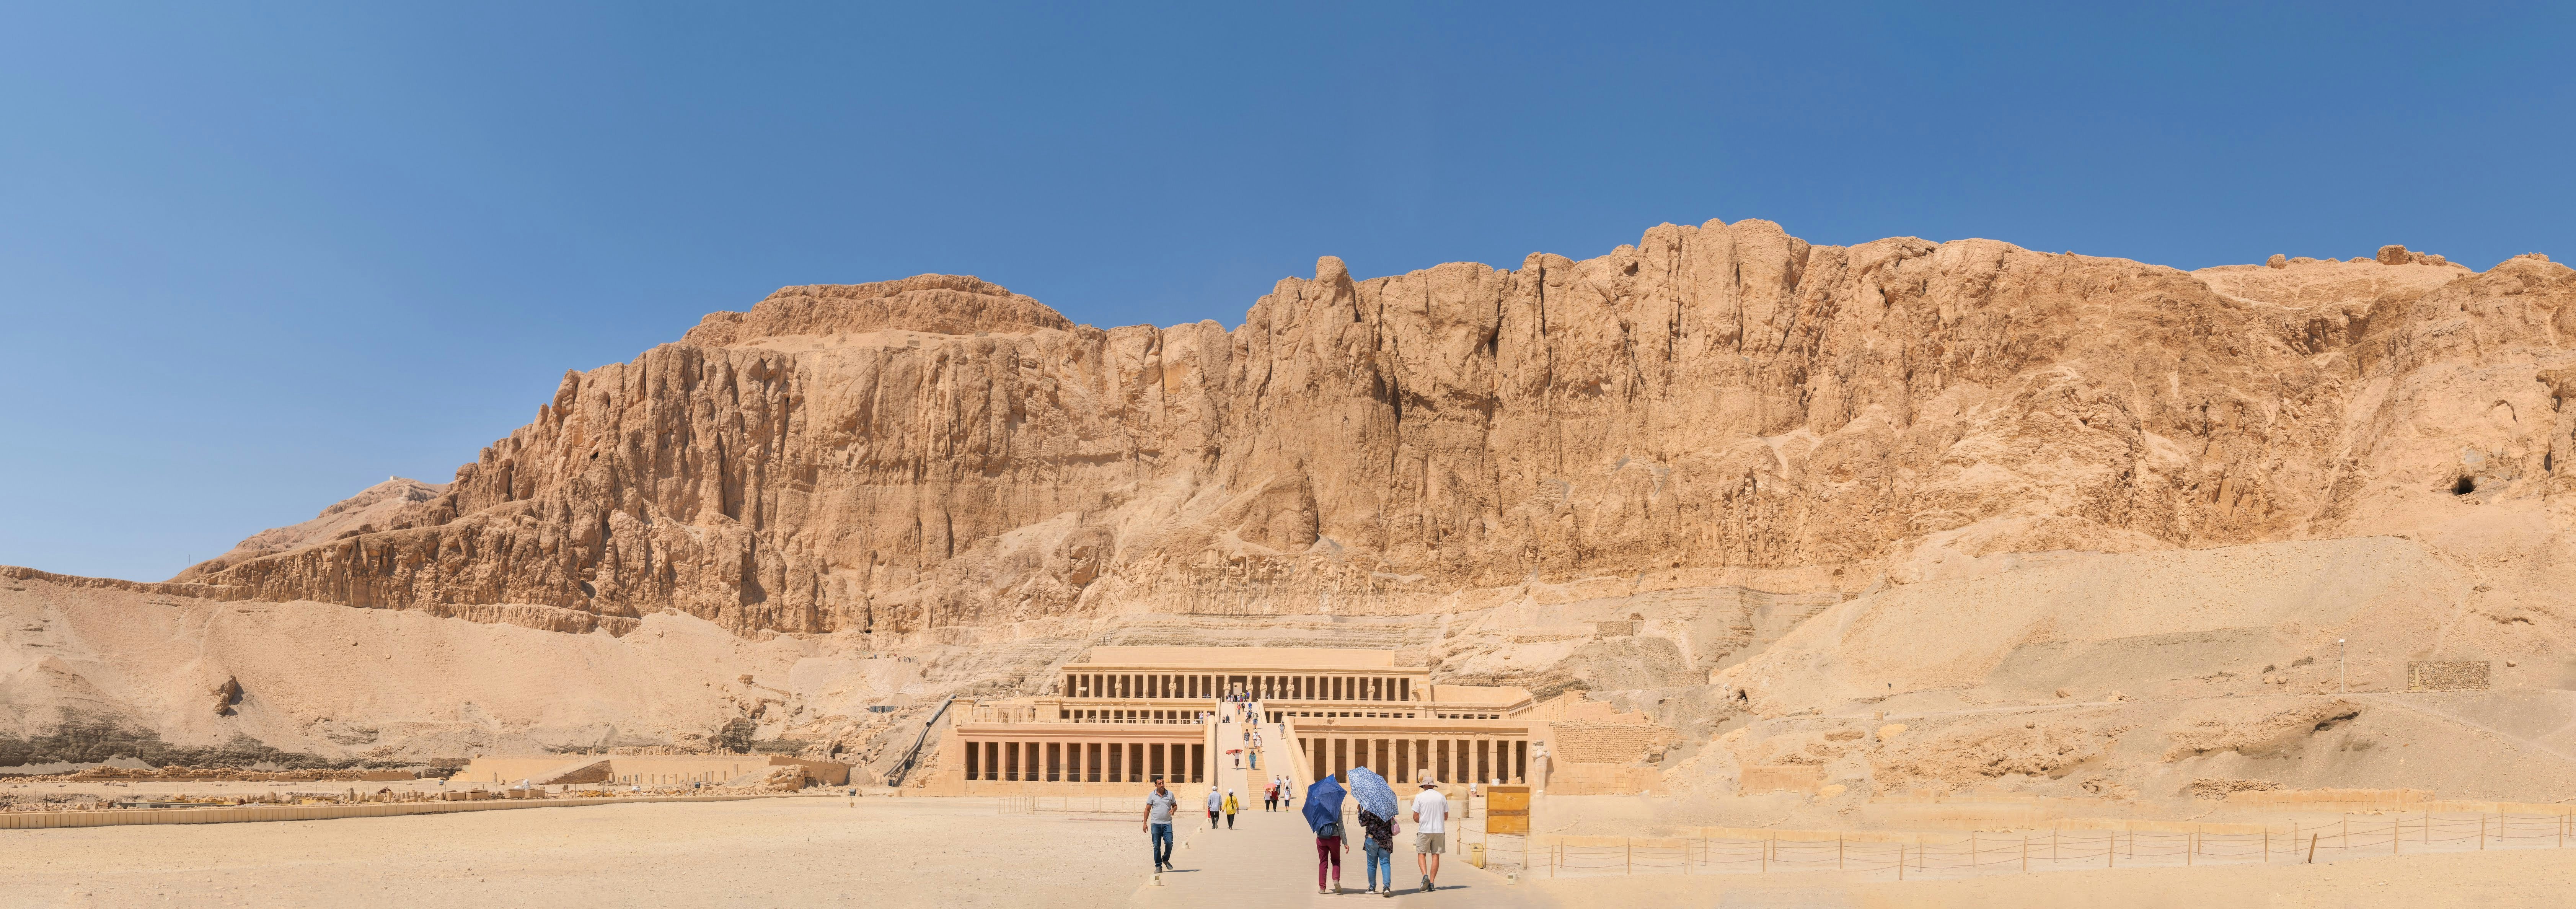 Mortuary temple of Hatshepsut in Panoramic view.